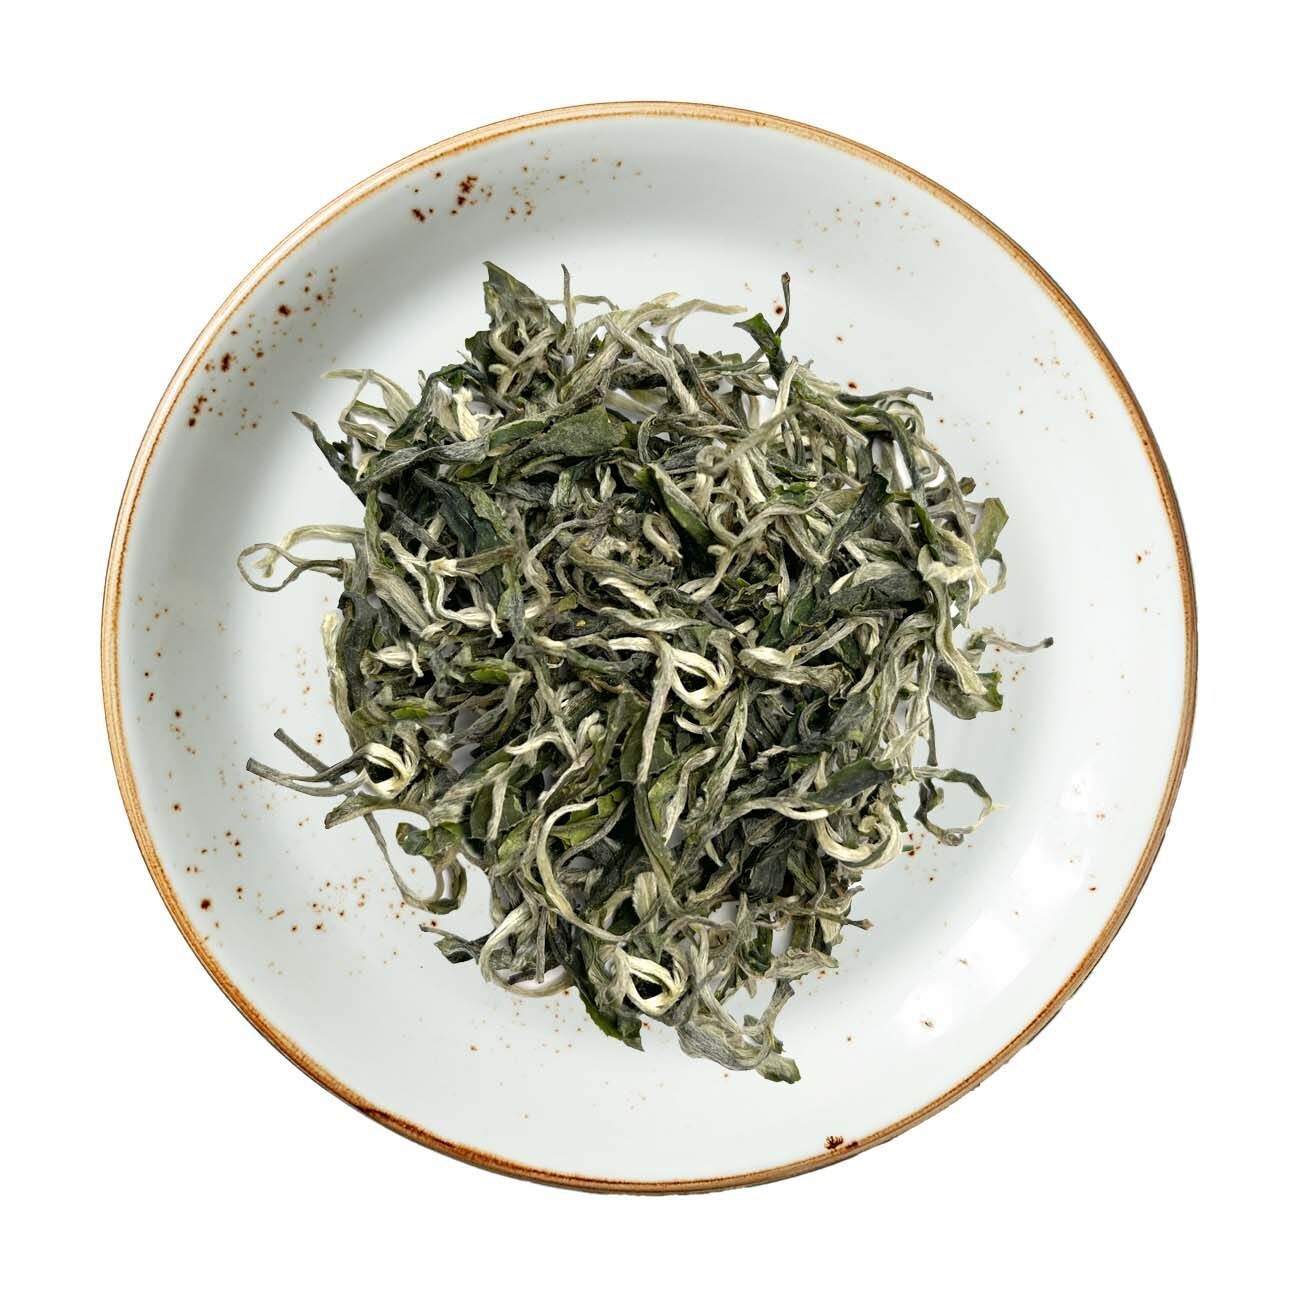 Cui Ming Green Tea, Sizes: One Ounce (28 grams)